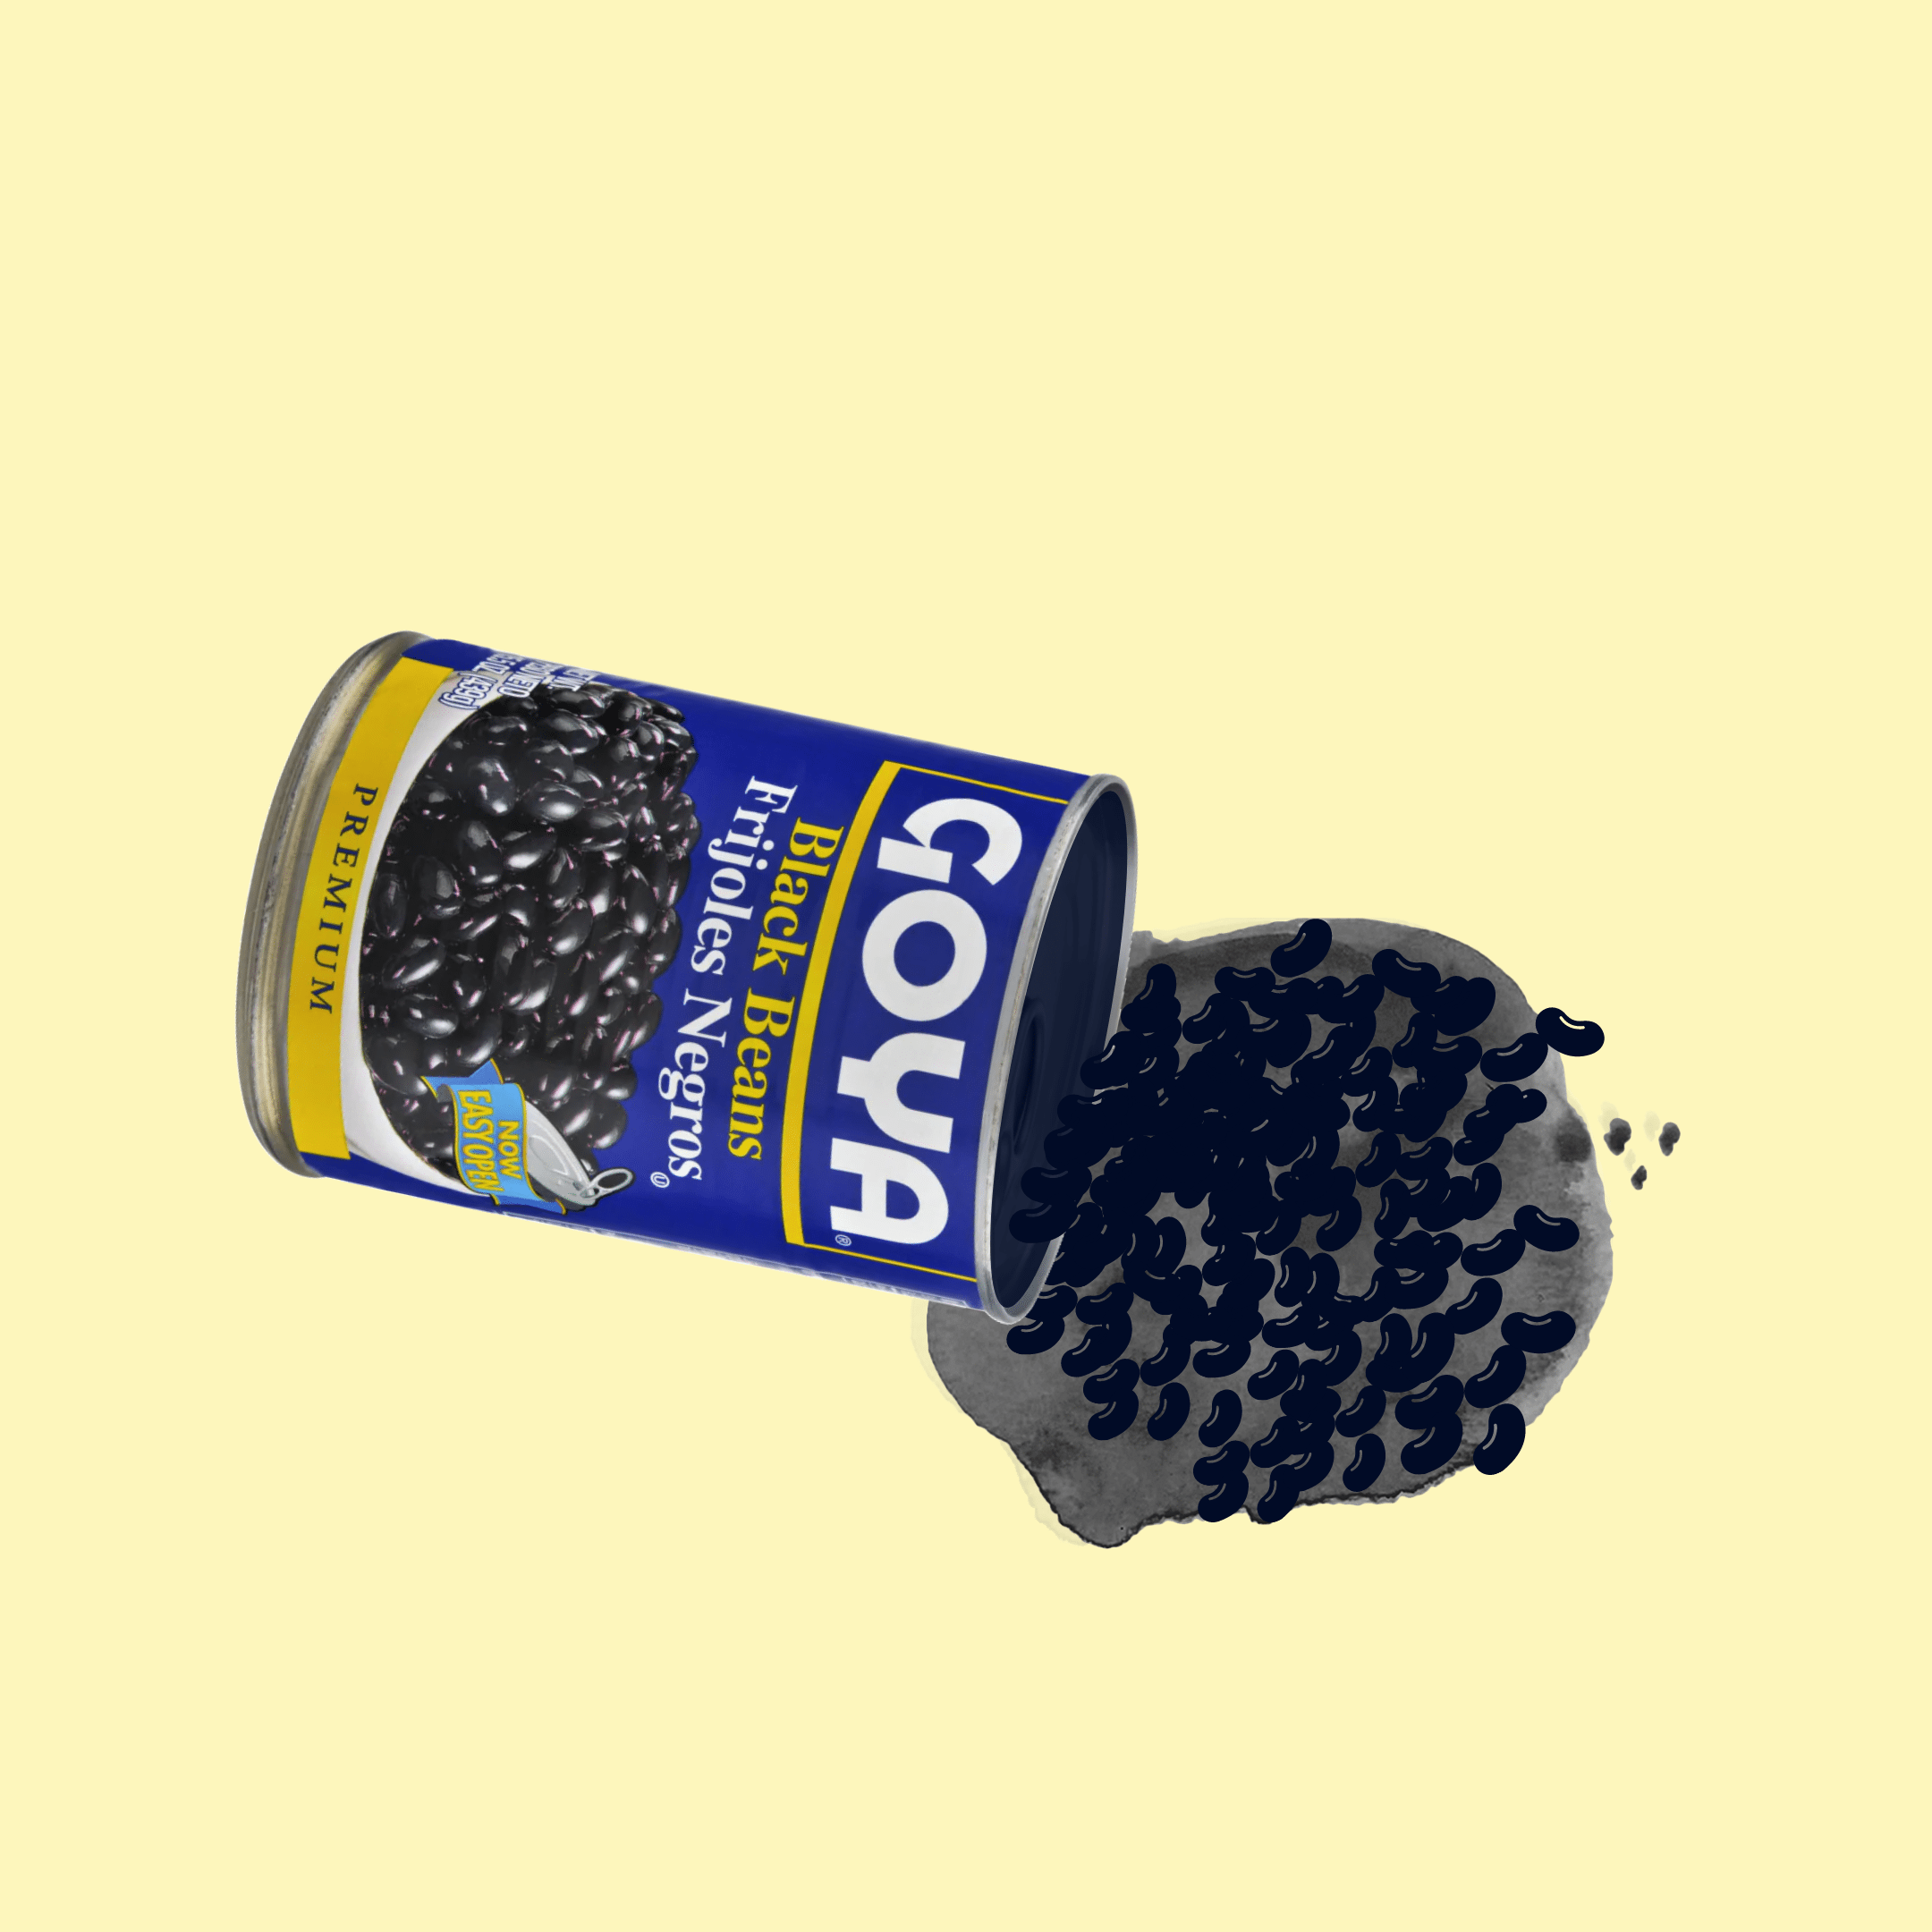 Photo illustration of spilled Goya beans by Maggie Chirdo.